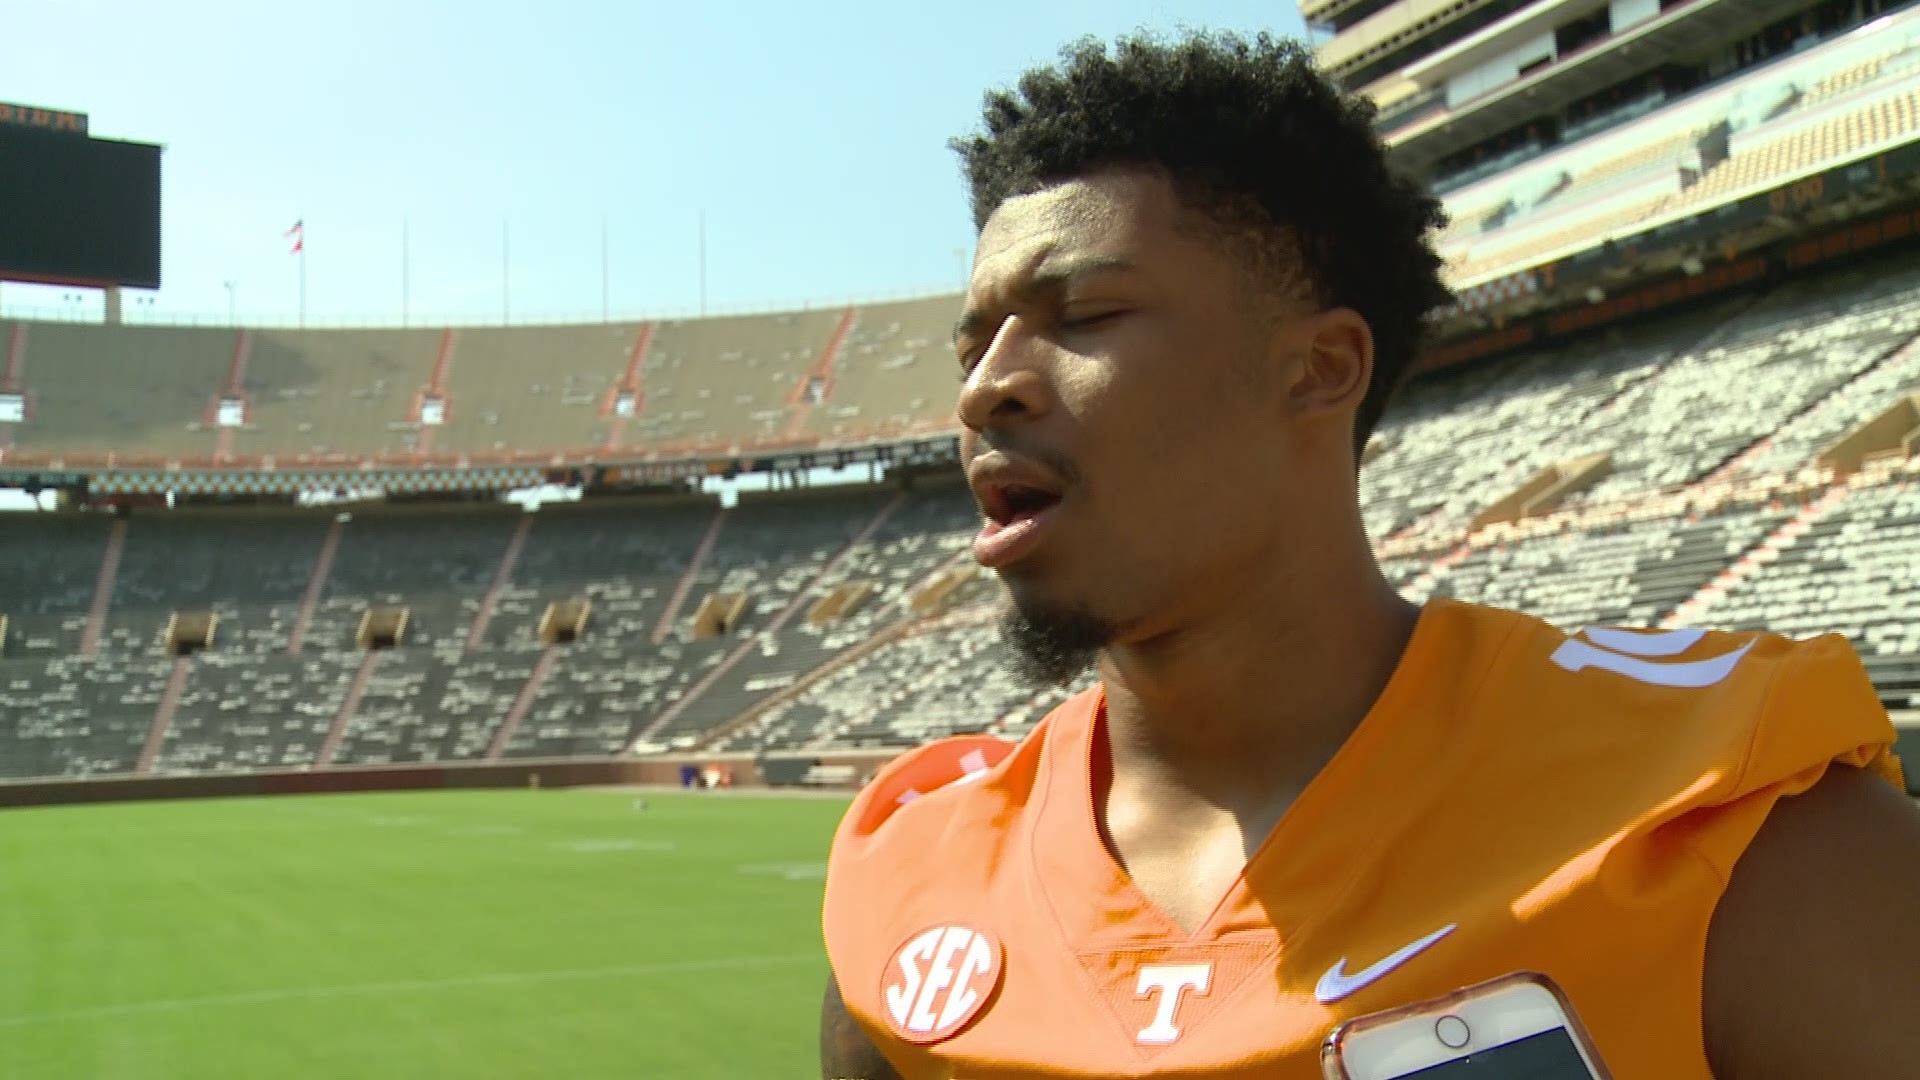 Tennessee linebacker Quart'e Sapp speaks with the media prior to Fan Day at Neyland Stadium.